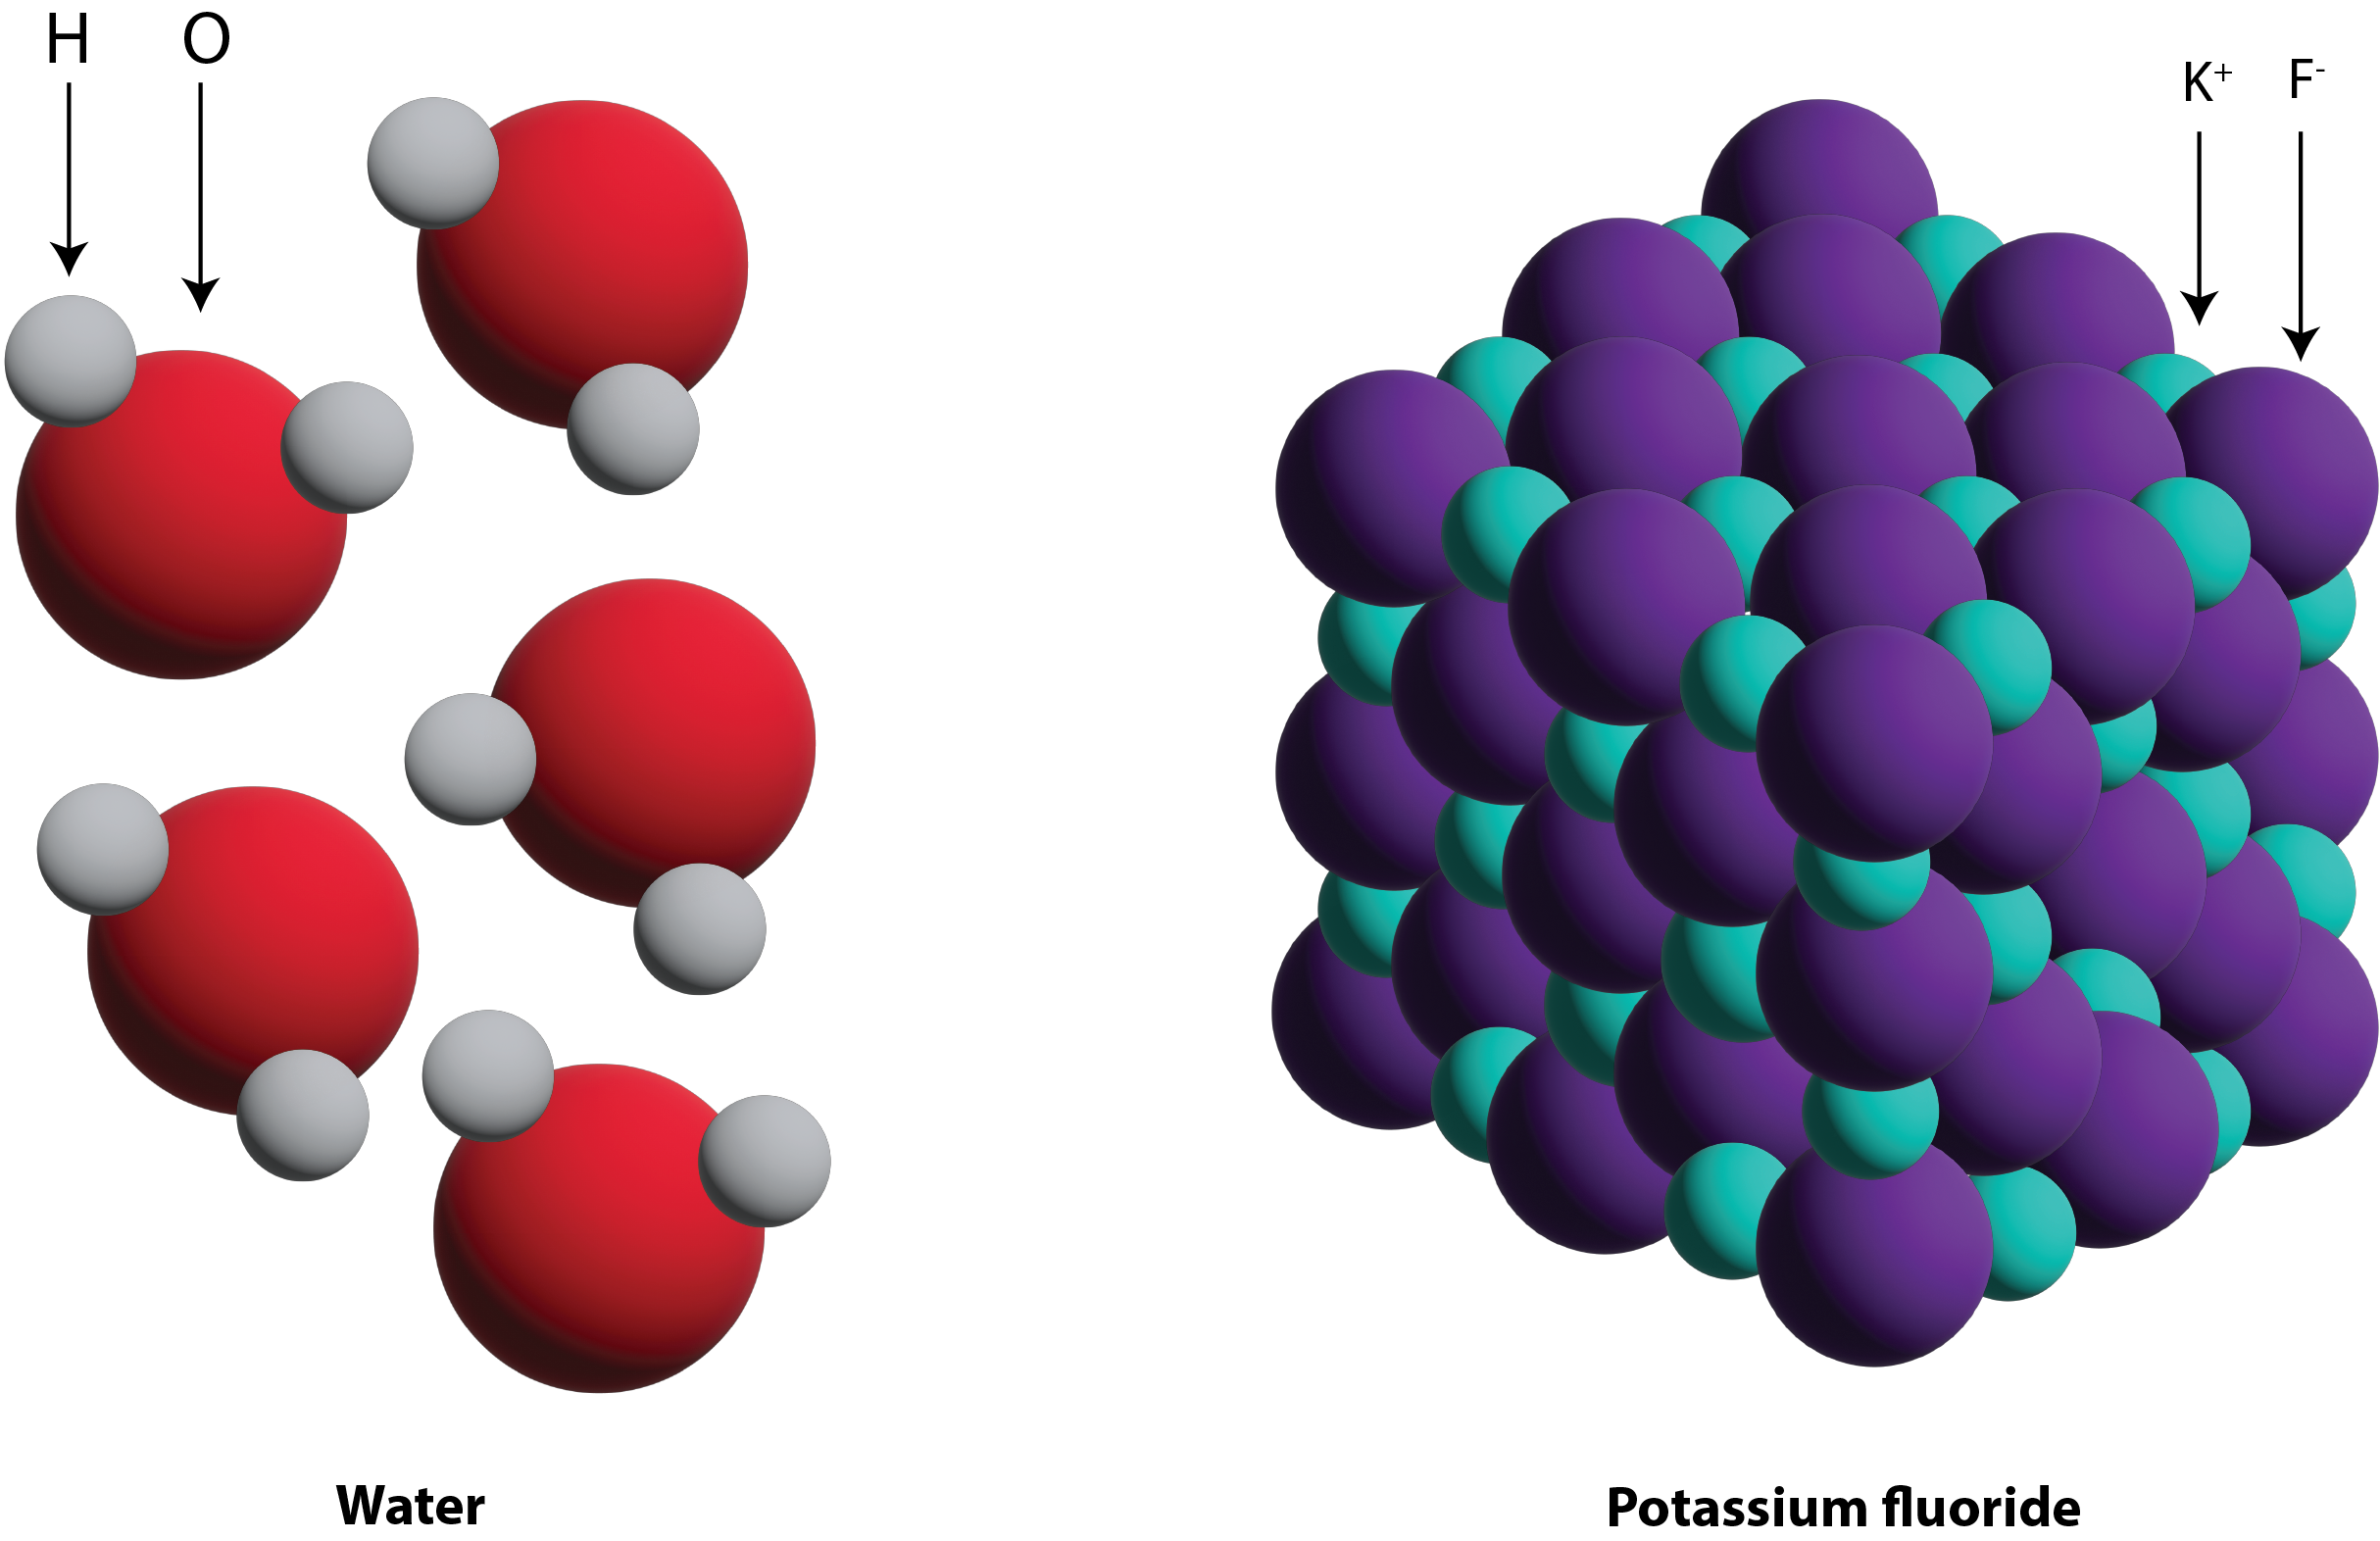 The structure of a covalently bonded water molecule has an imbalanced appearance compared to potassium fluoride with a consistent matrix structure.